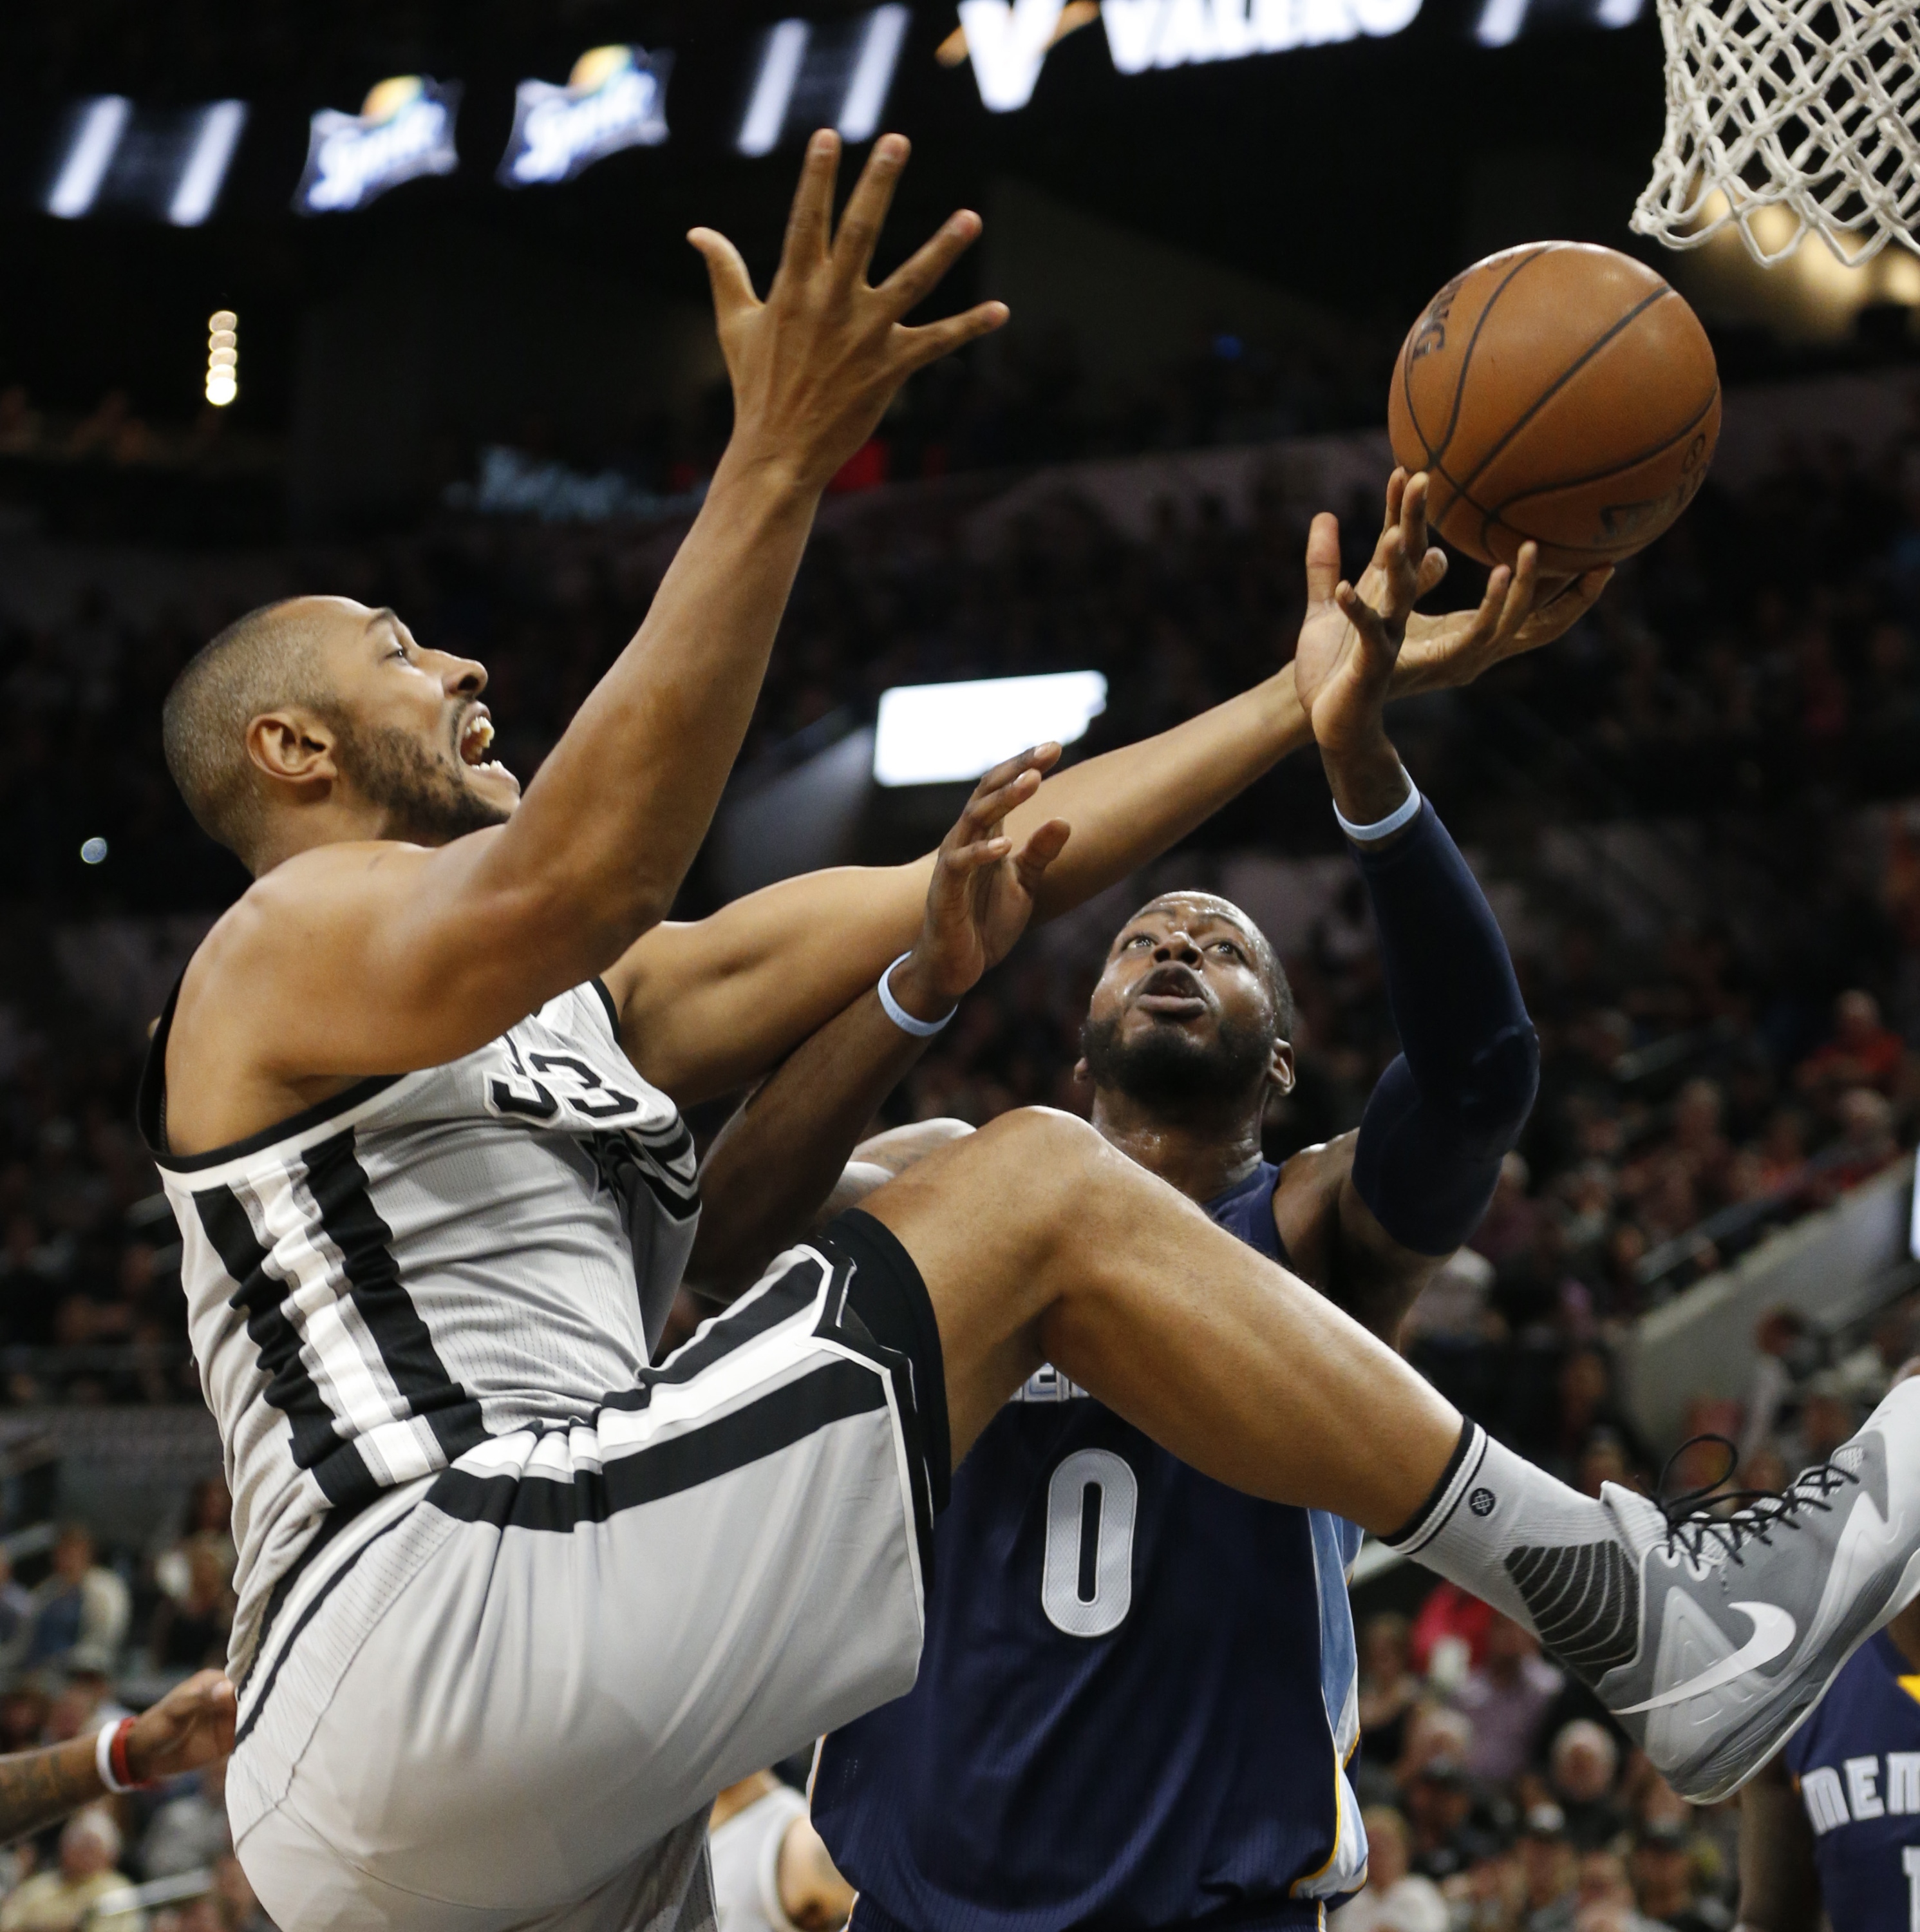 Boris Diaw tries a new exercise routine. (Ronald Cortes/Getty Images)